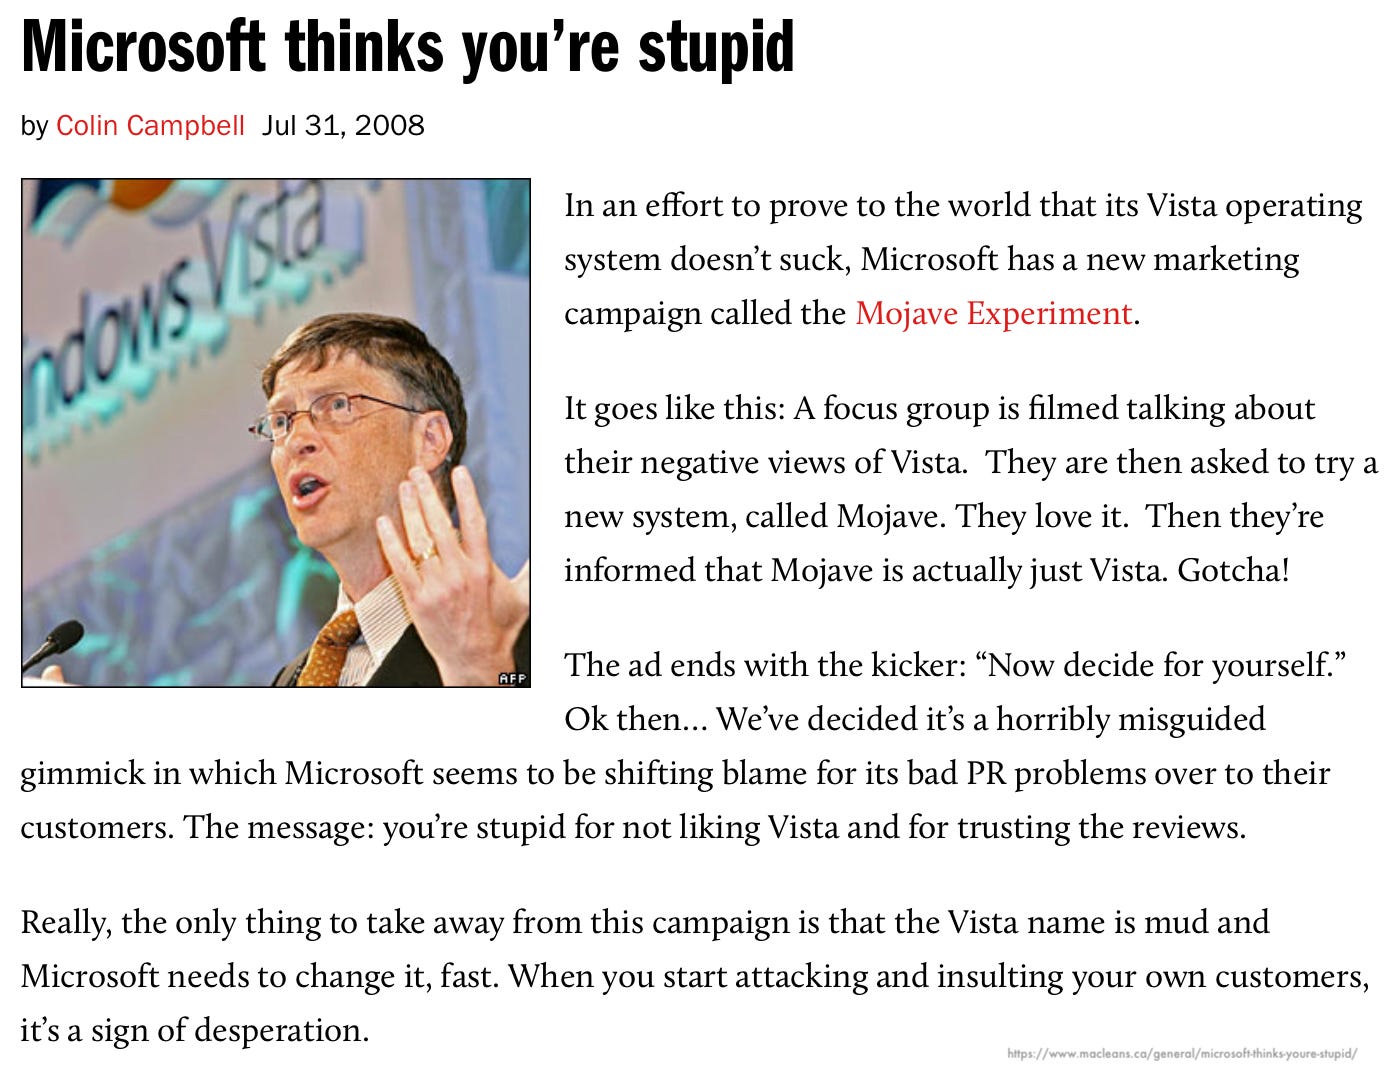 Microsoft thinks you're stupid by Colin Campbell Jul 31, 2008 nous / sta In an effort to prove to the world that its Vista operating system doesn't suck, Microsoft has a new marketing campaign called the Mojave Experiment. It goes like this: A focus group is filmed talking about their negative views of Vista. They are then asked to try a new system, called Mojave. They love it. Then they're informed that Mojave is actually just Vista. Gotcha! AFP The ad ends with the kicker: "Now decide for yourself." Ok then... We've decided it's a horribly misguided gimmick in which Microsoft seems to be shifting blame for its bad PR problems over to their customers. The message: you're stupid for not liking Vista and for trusting the reviews. Really, the only thing to take away from this campaign is that the Vista name is mud and Microsoft needs to change it, fast. When you start attacking and insulting your own customers, it's a sign of desperation.